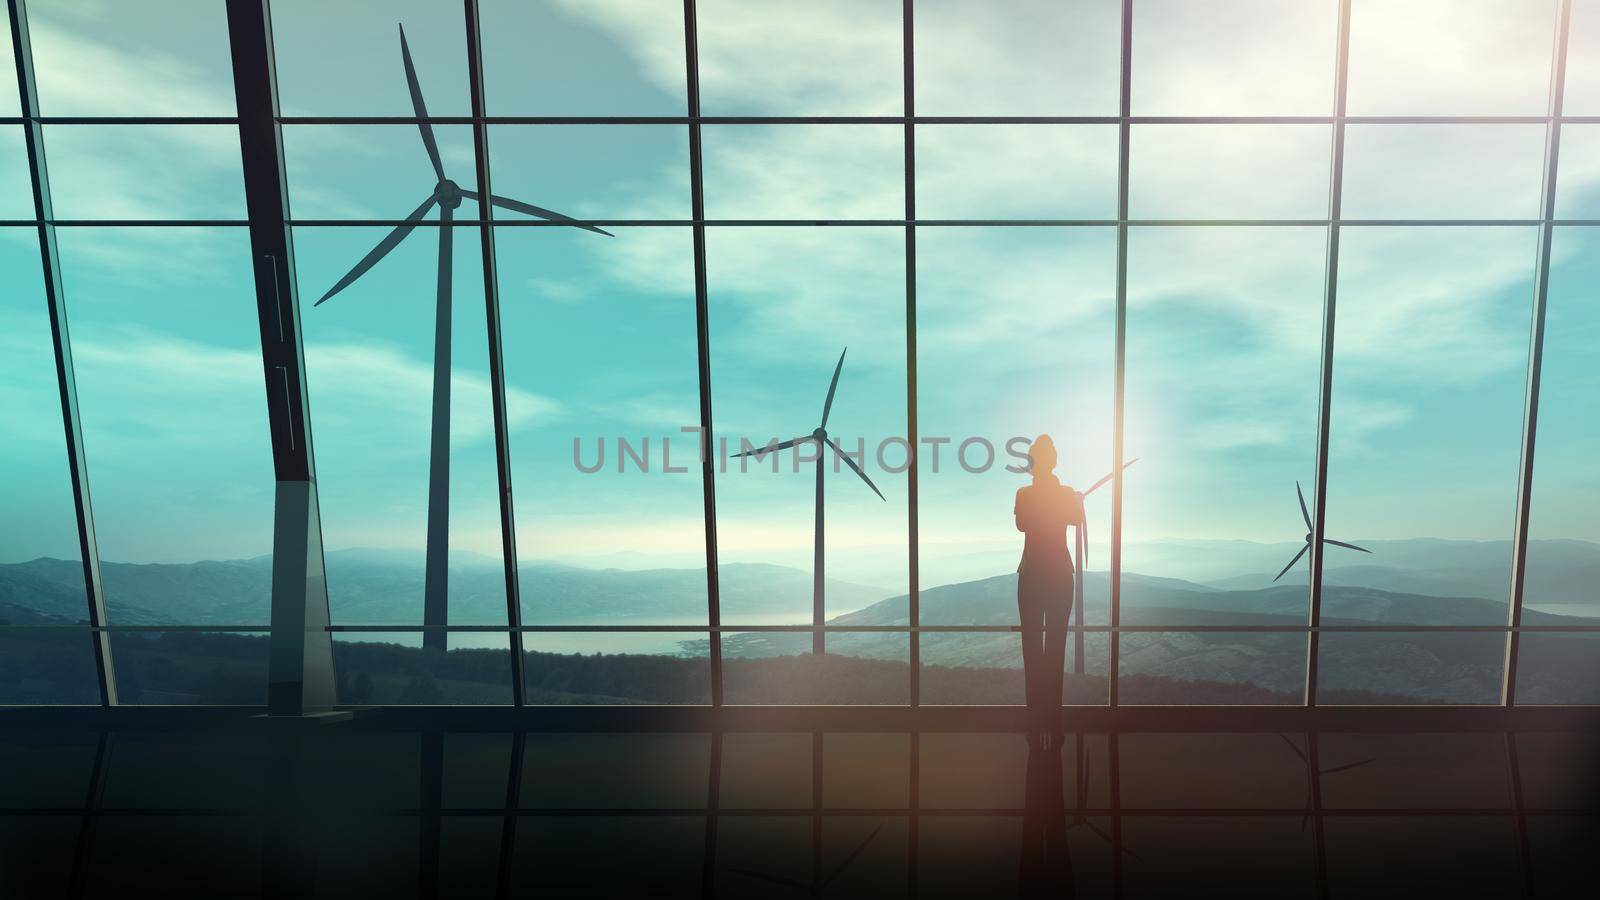 In a spacious room against the window, a business woman looks at wind turbines. by ConceptCafe